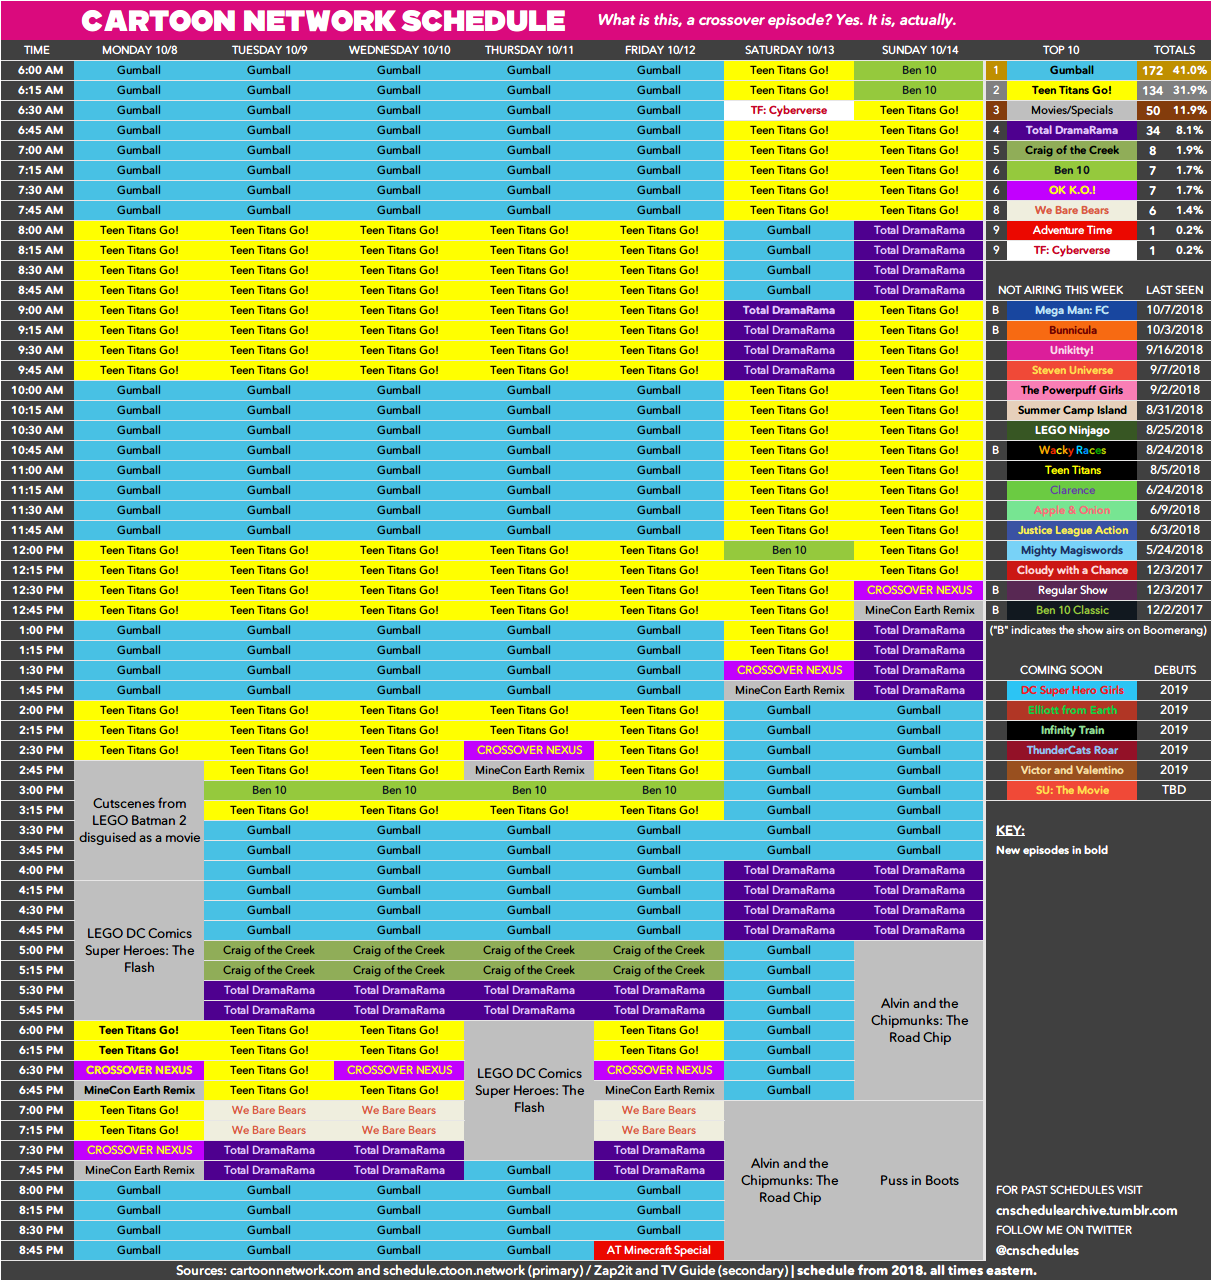 cnschedulearchive - Here's the Cartoon Network schedule for...